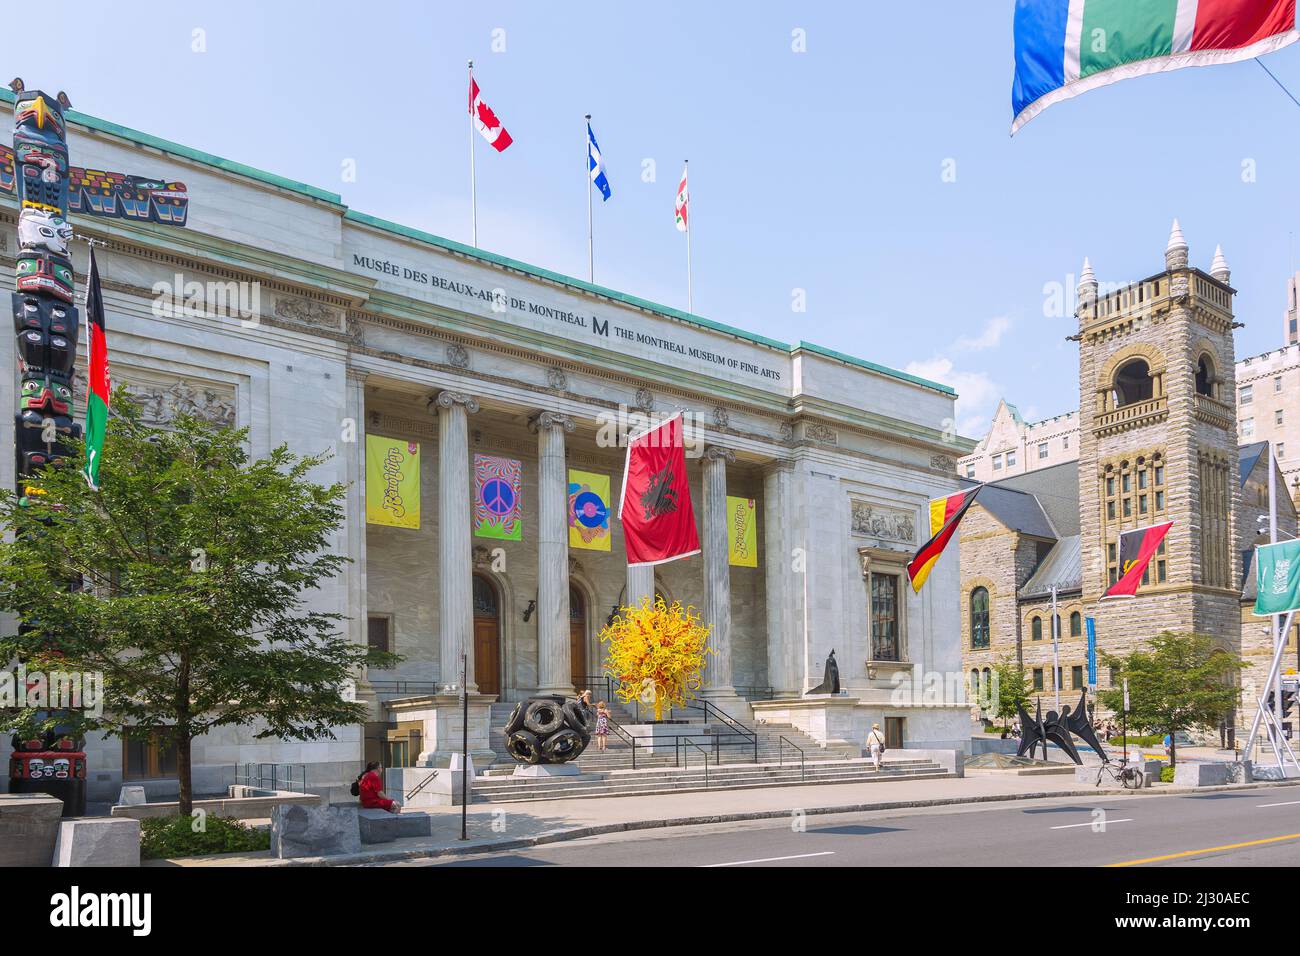 Montreal; Montreal Museum of Fine Arts, Rue Sherbrooke Stockfoto